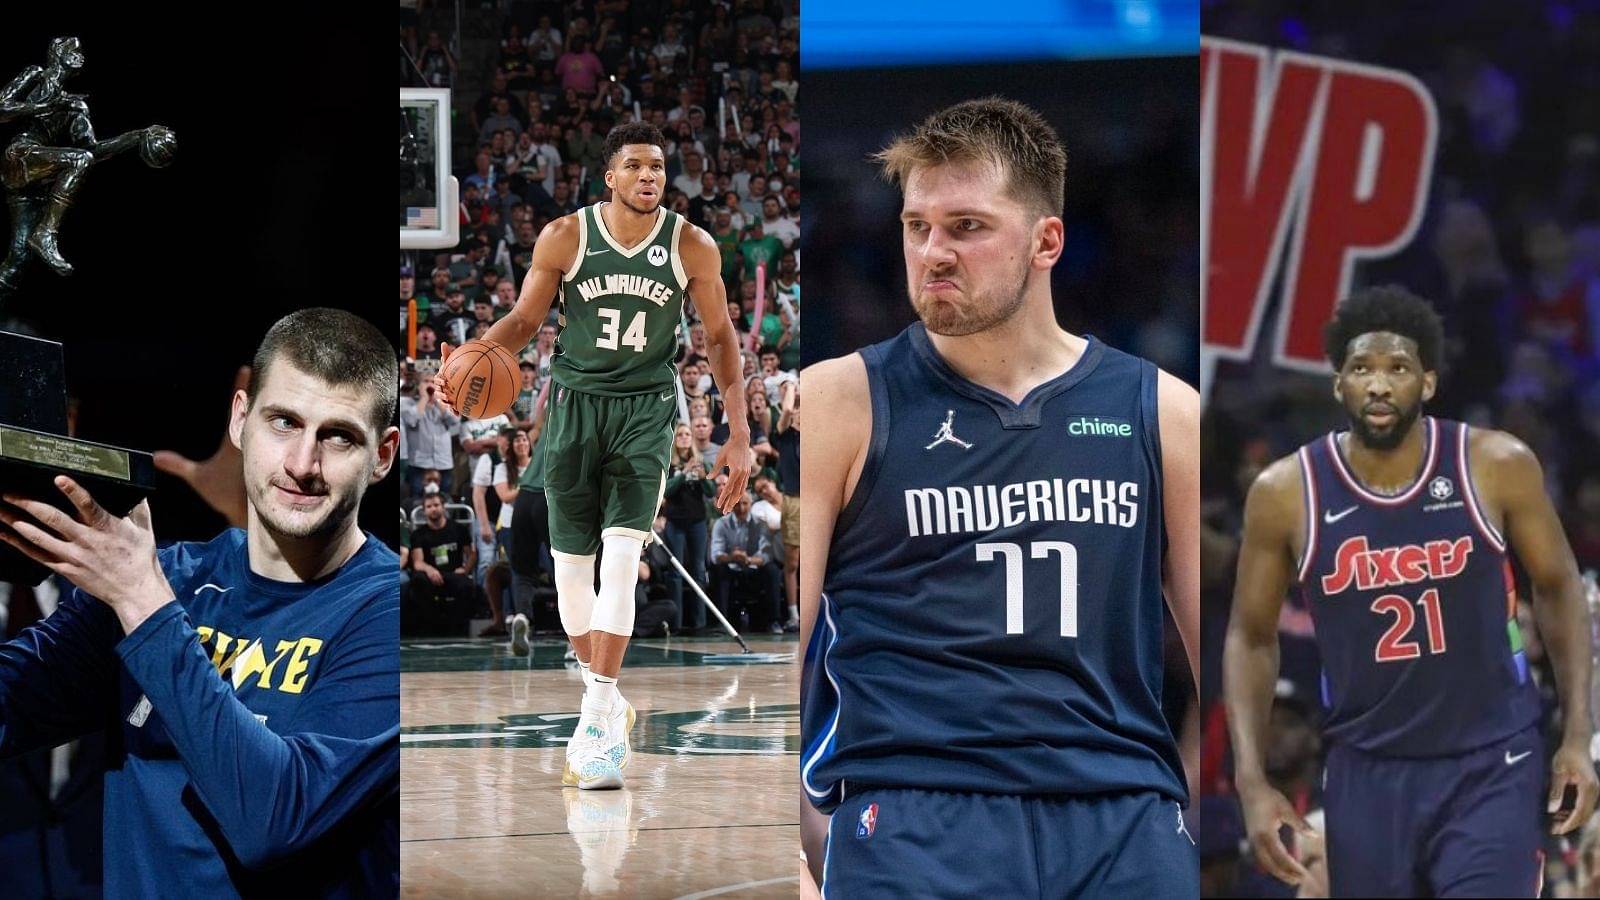 "The 80s were for Larry Bird and Magic Johnson, the 20s are going to be for Luka Doncic and Giannis": Nick Wright calls the next decade Giannis and Luka's as Lebron and KD approach the end of their careers